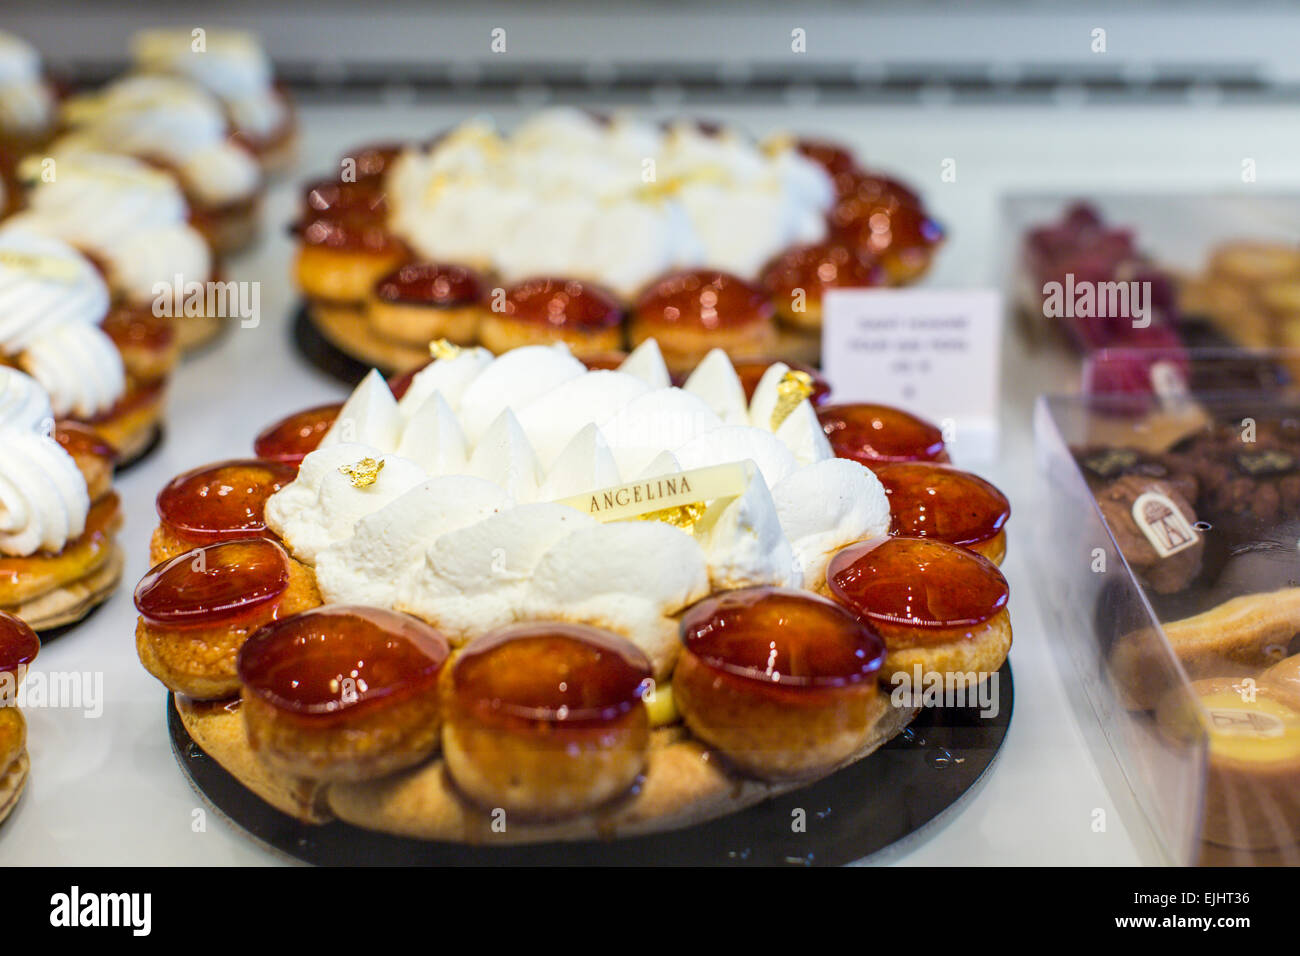 Angelina cakes in display case with signs, Paris, France Stock Photo